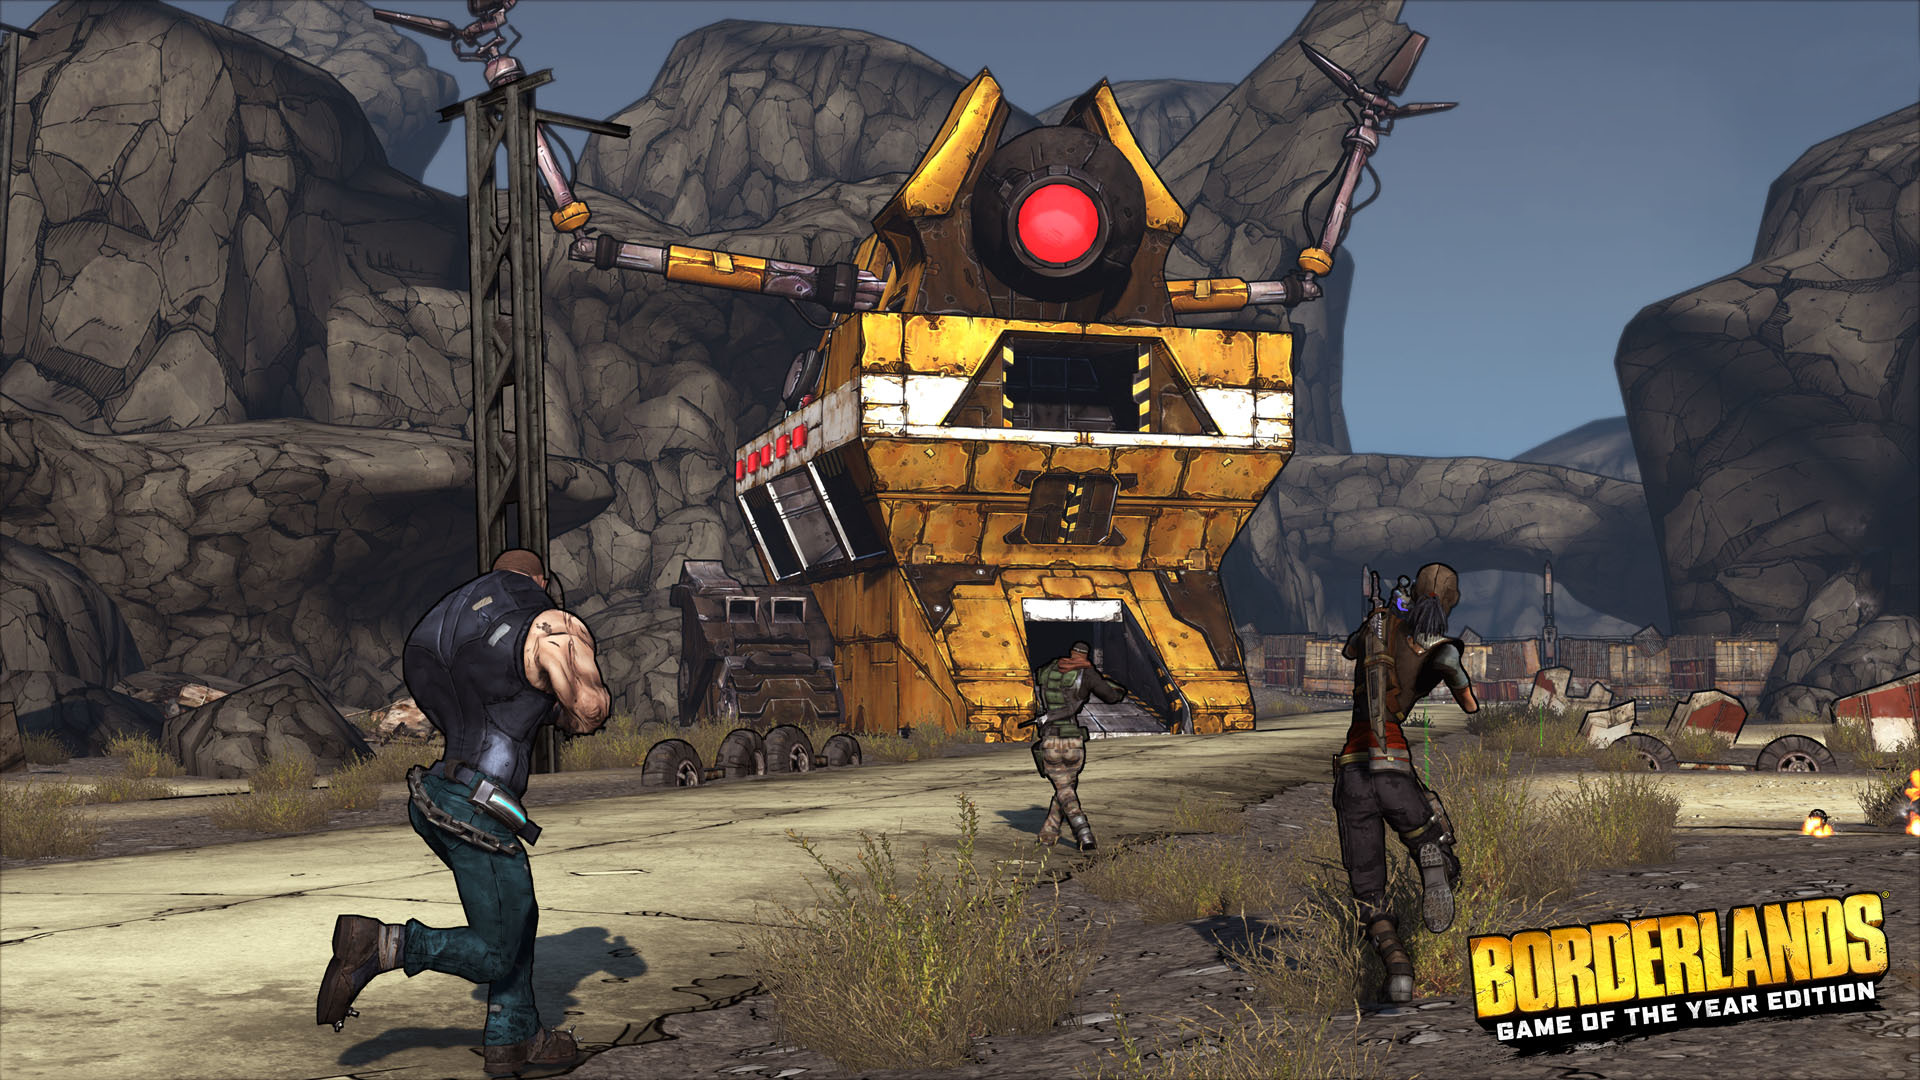 Borderlands: Game of the Year Edition screenshot 19788